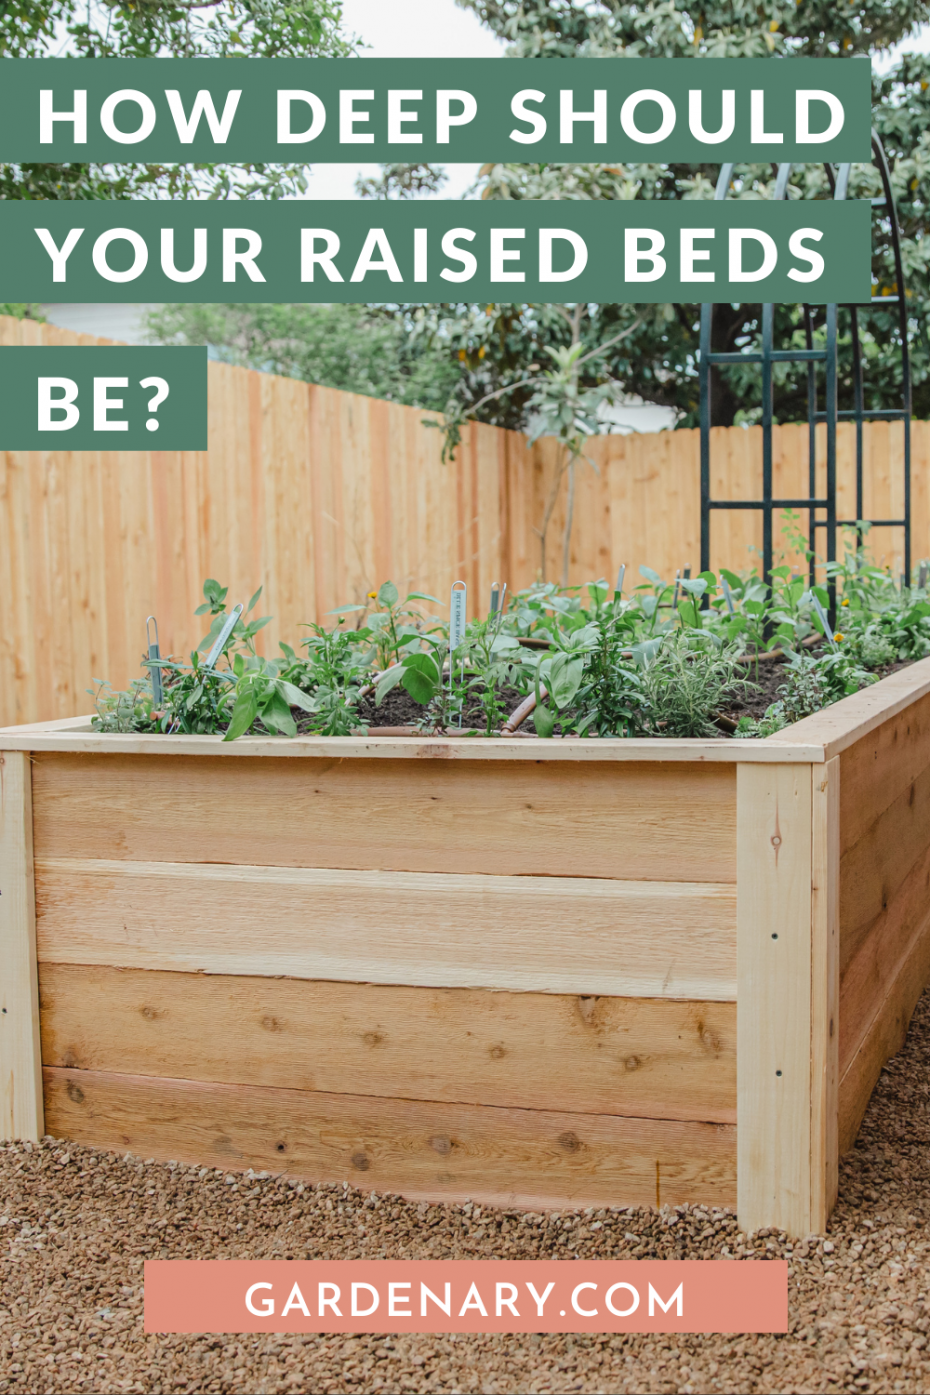 How wide should a raised garden bed be